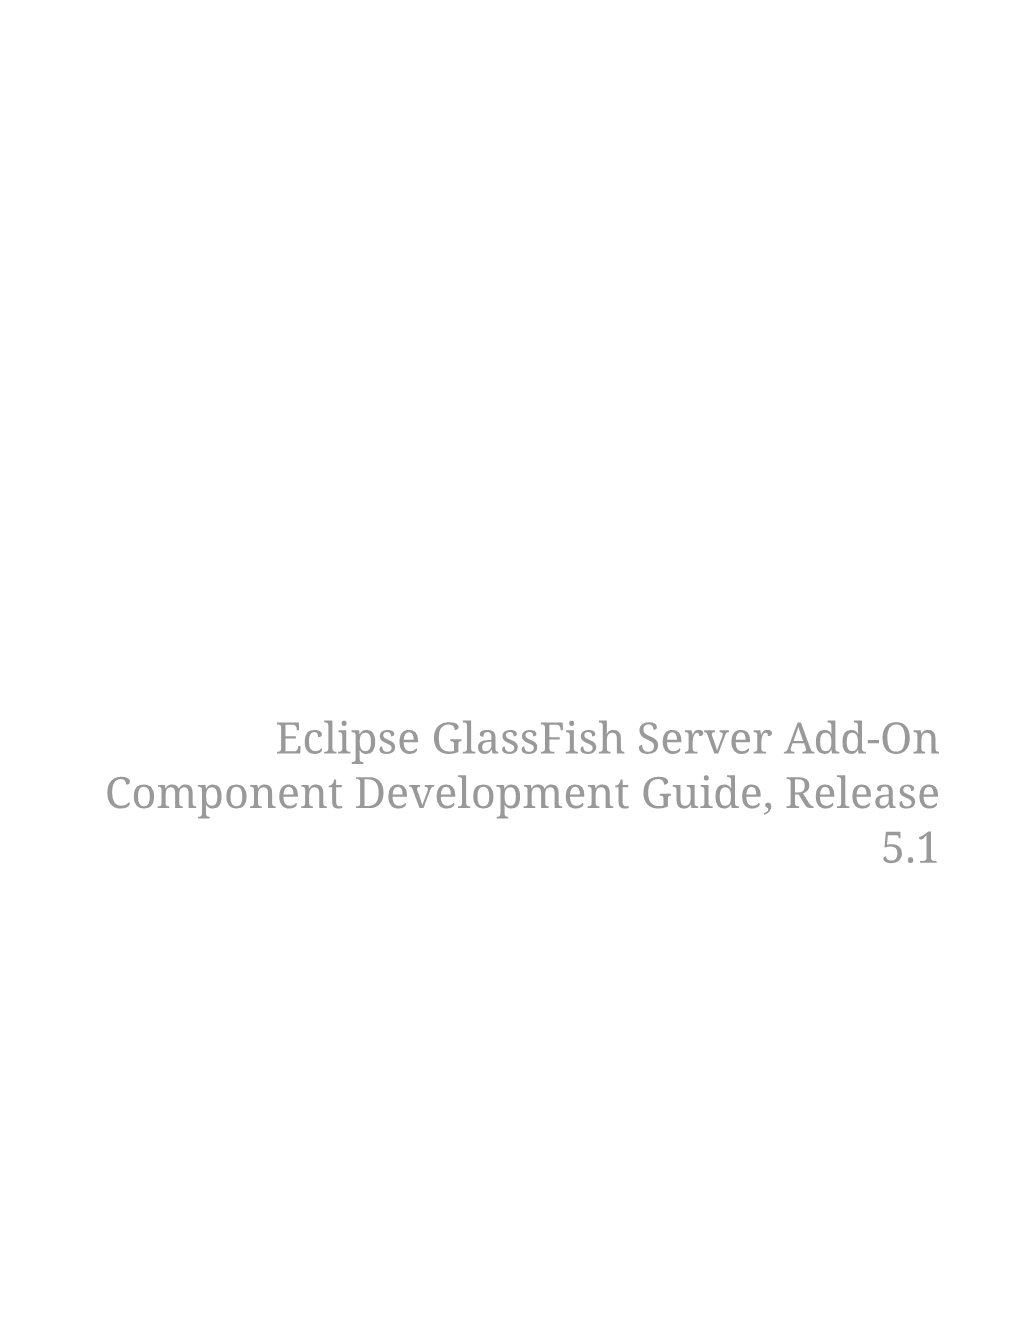 Eclipse Glassfish Server Add-On Component Development Guide, Release 5.1 Table of Contents